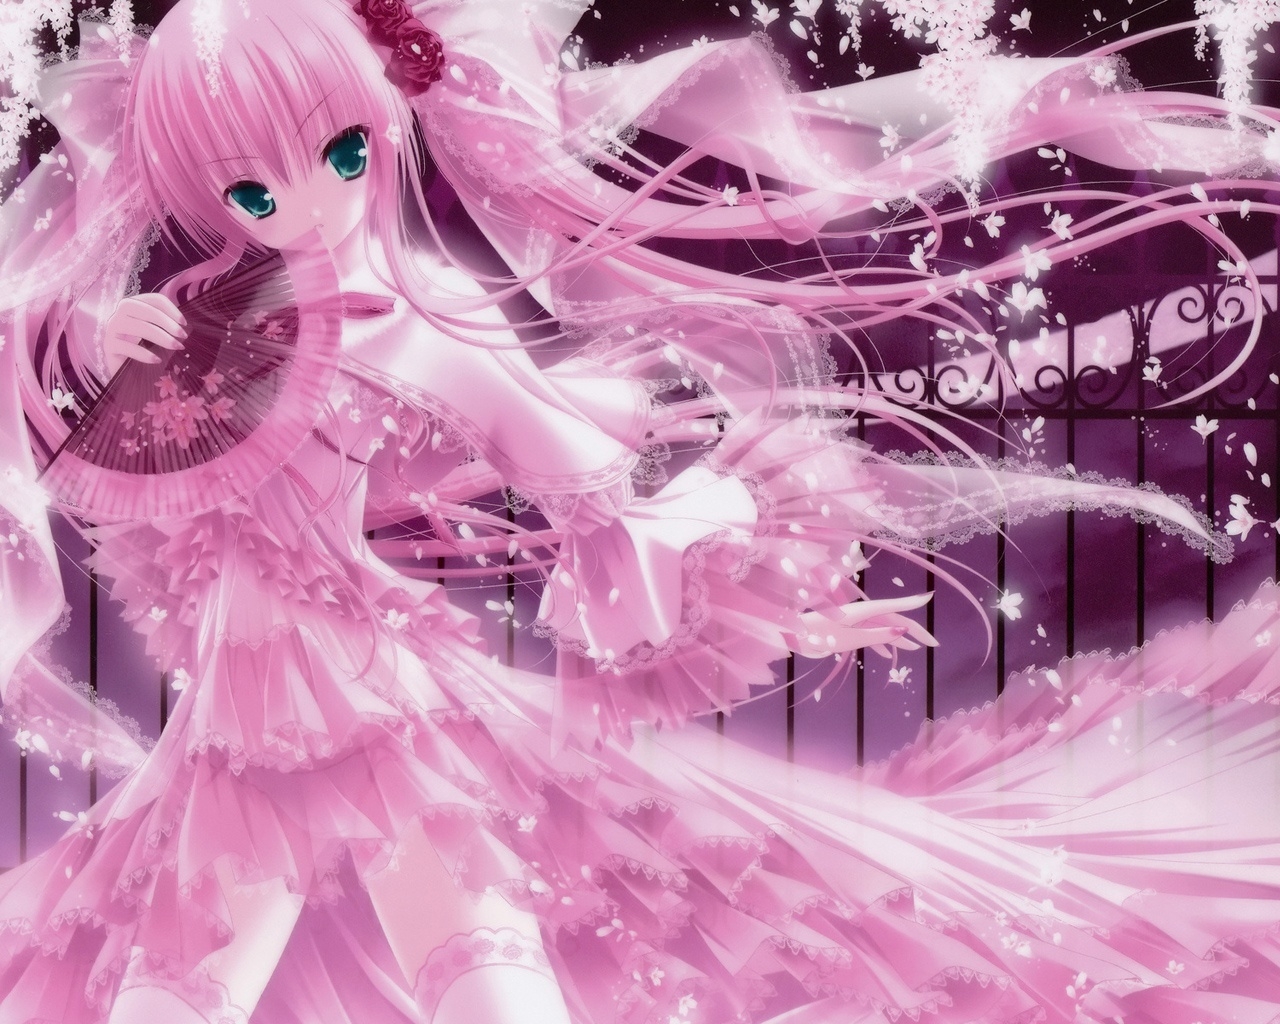 Pink Nightgown for 1280 x 1024 resolution